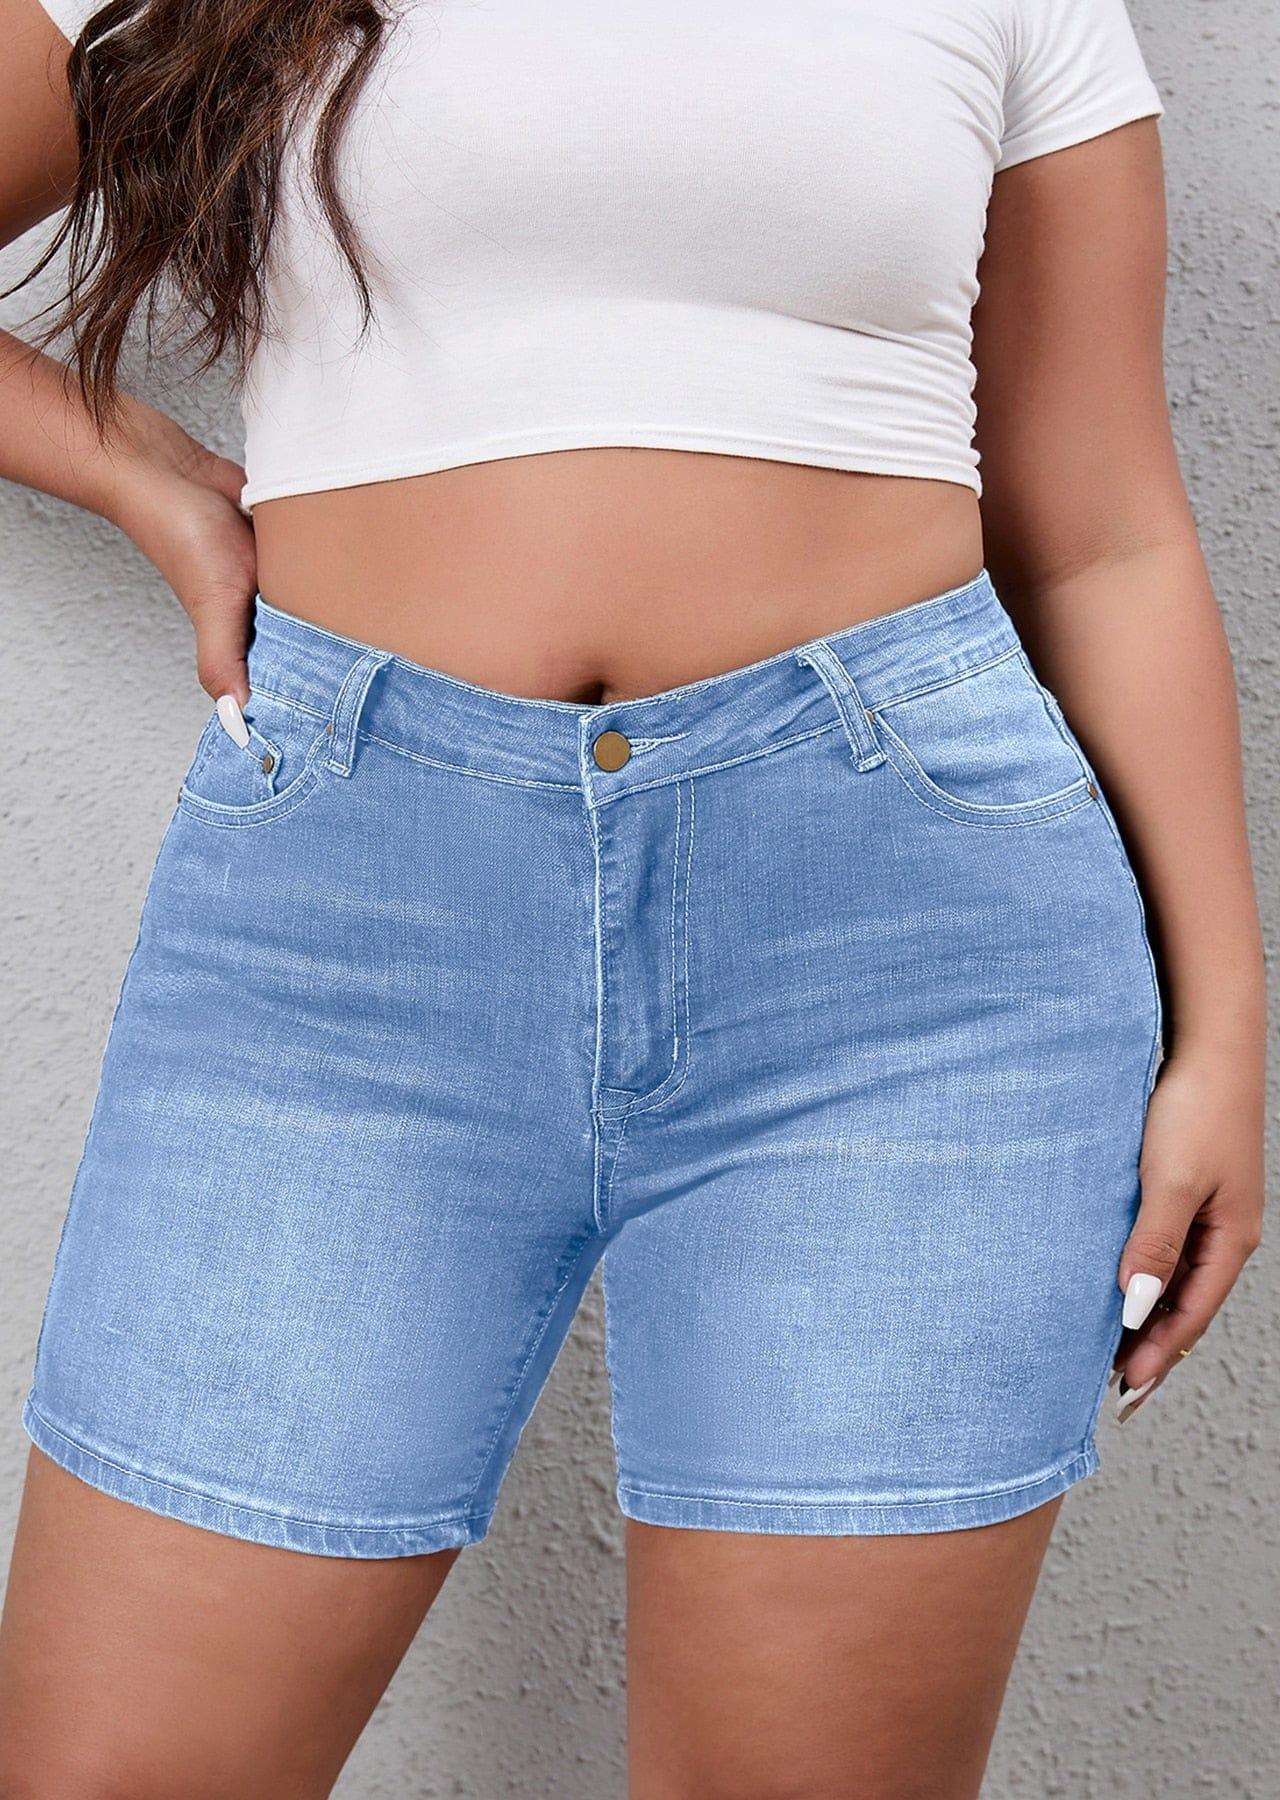 Zoey shorts (Plus sizes) - VERSO QUALITY MATERIALS